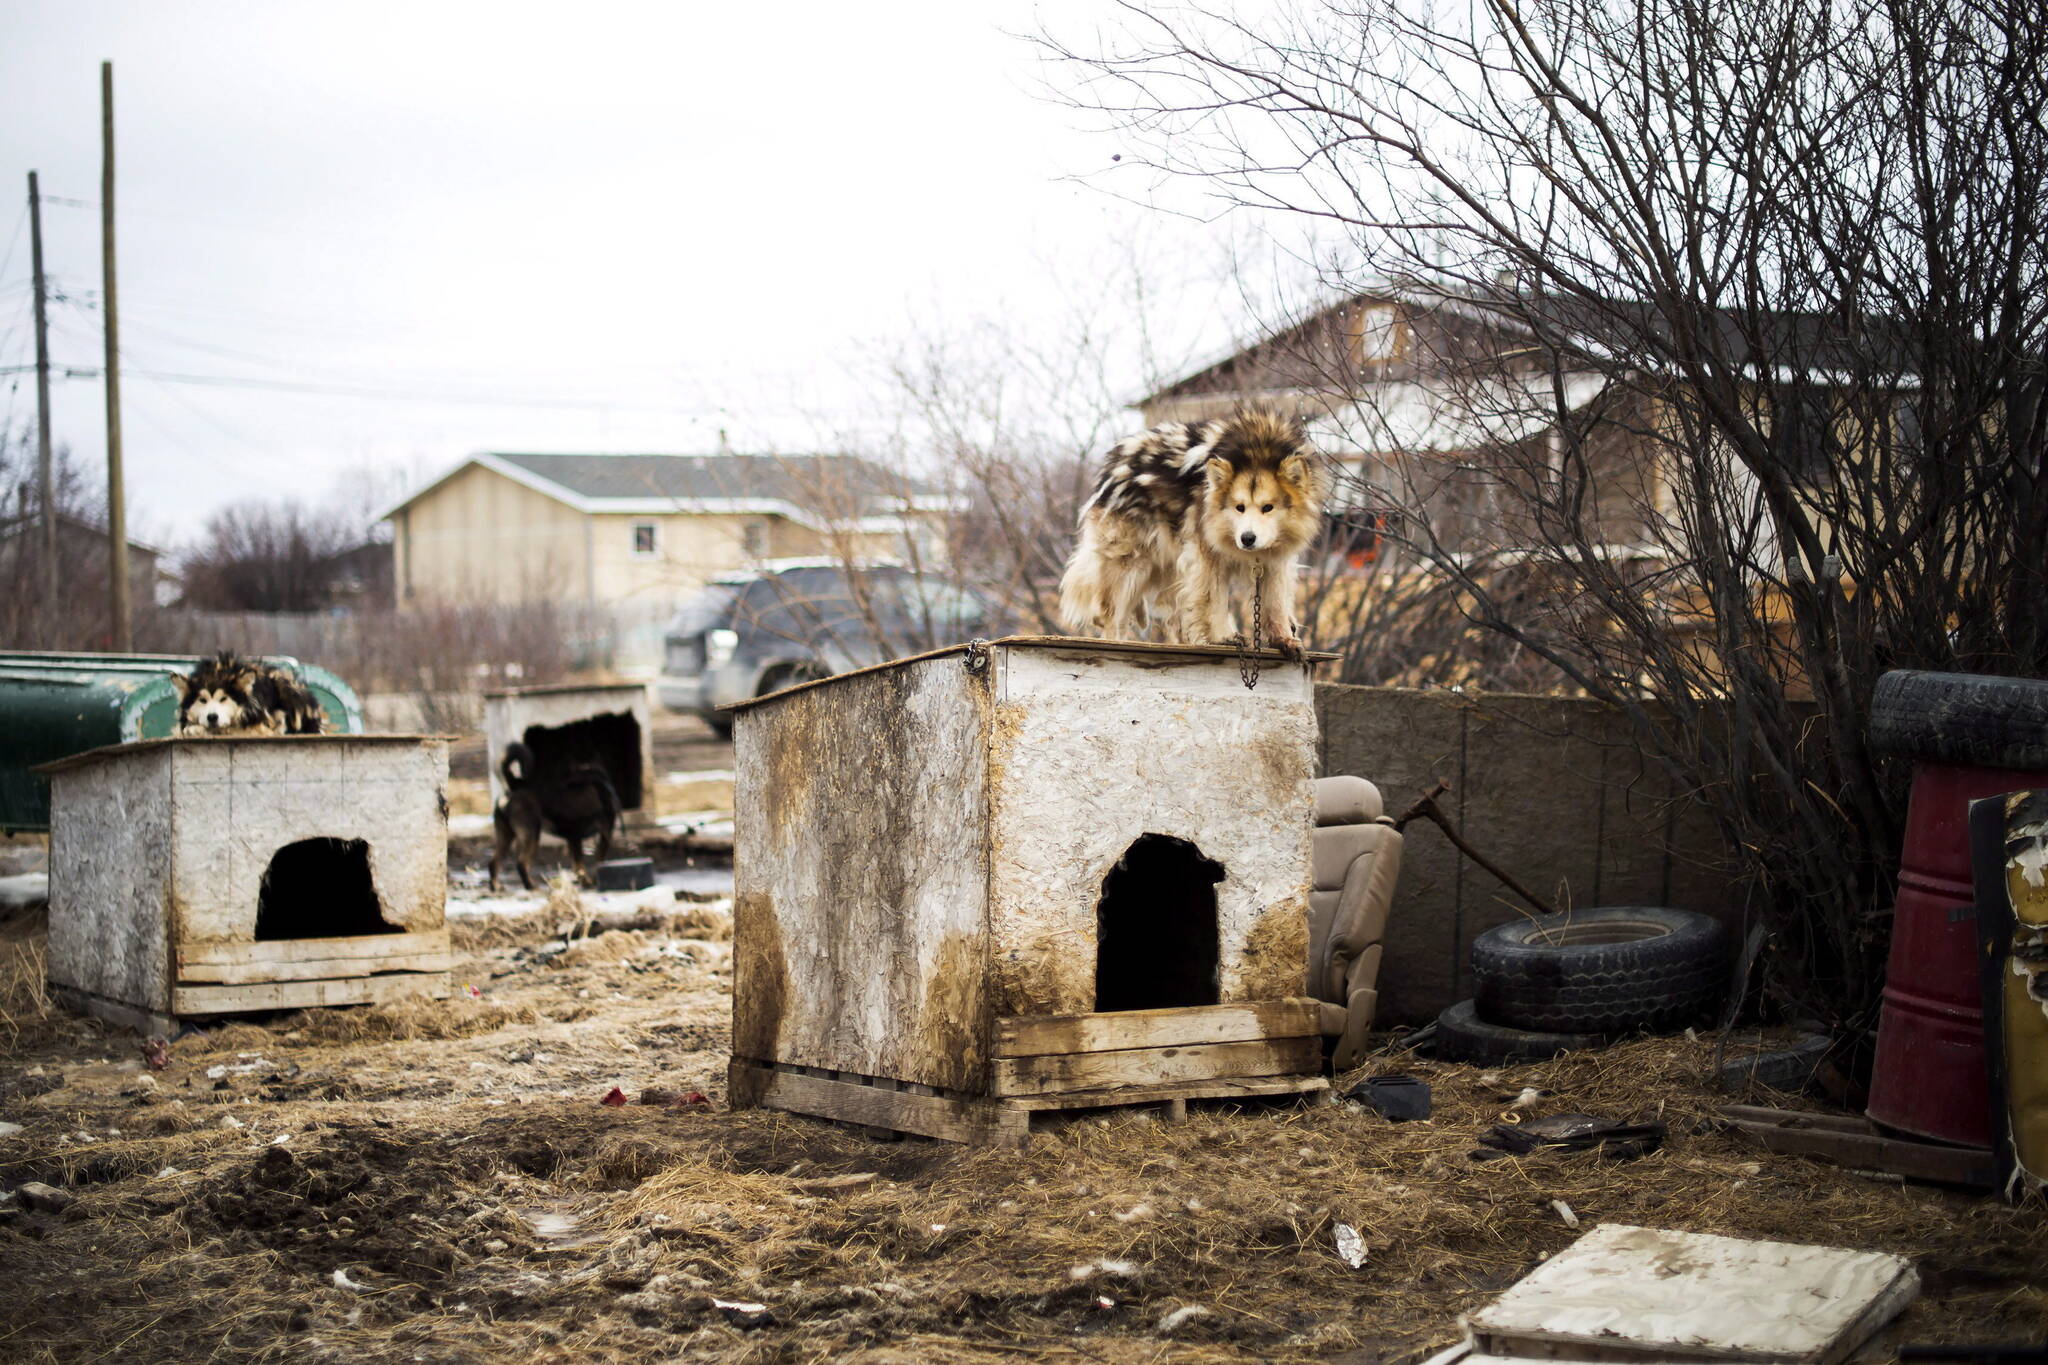 Dogs are chained up in the northern Ontario First Nations reserve in Attawapiskat, Ont., on Tuesday, April 19, 2016. The James Bay community of 2,000 is under a state of emergency due to a spike in youth suicide attempts. THE CANADIAN PRESS/Nathan Denette